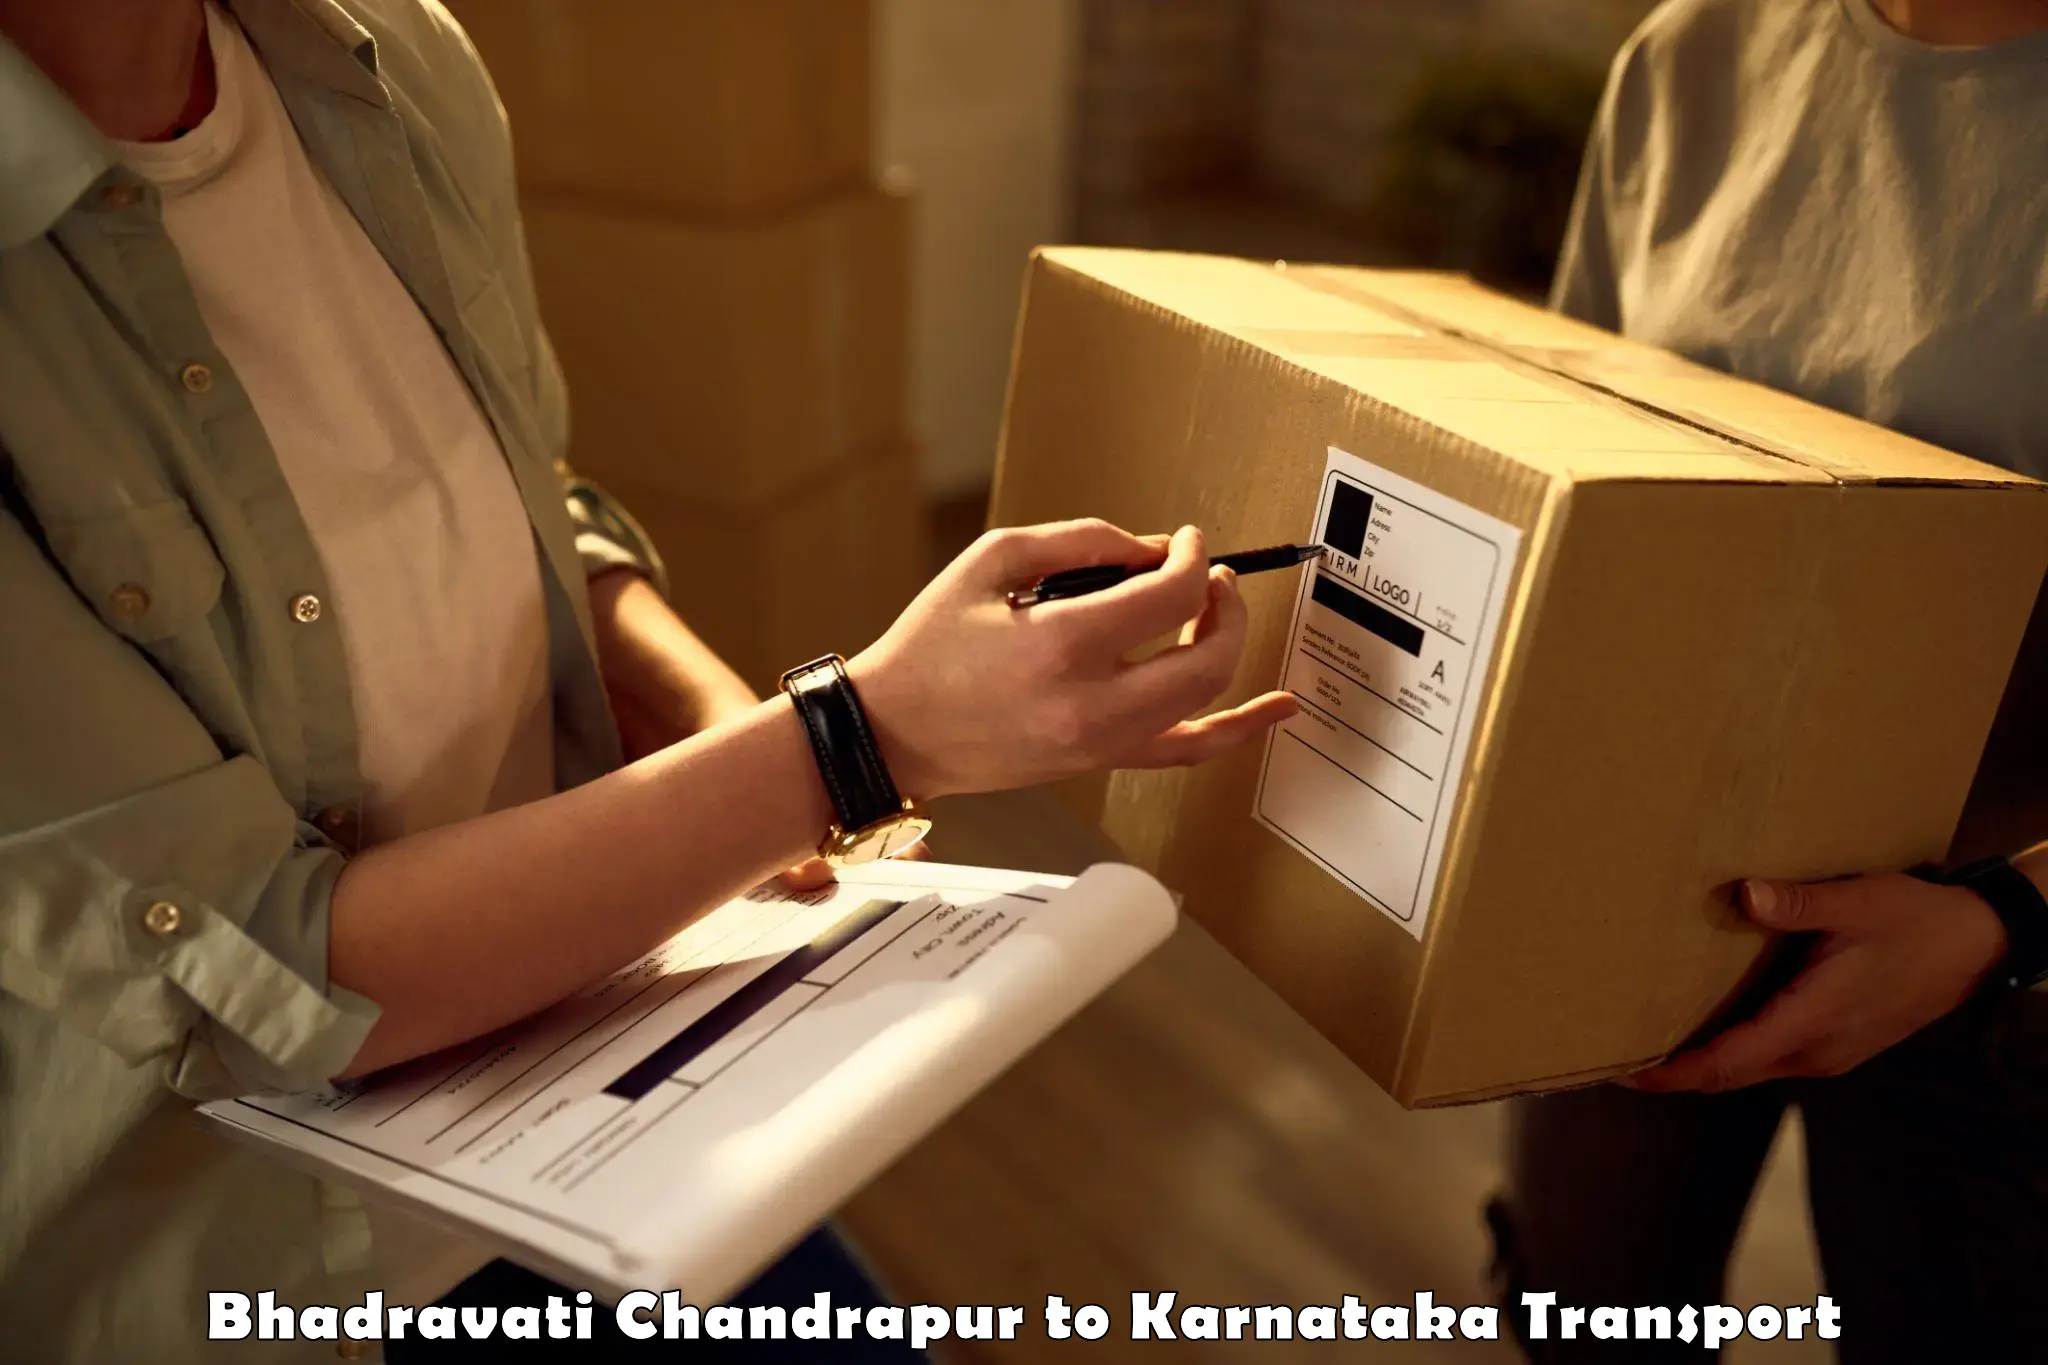 Cargo transport services Bhadravati Chandrapur to Manipal Academy of Higher Education